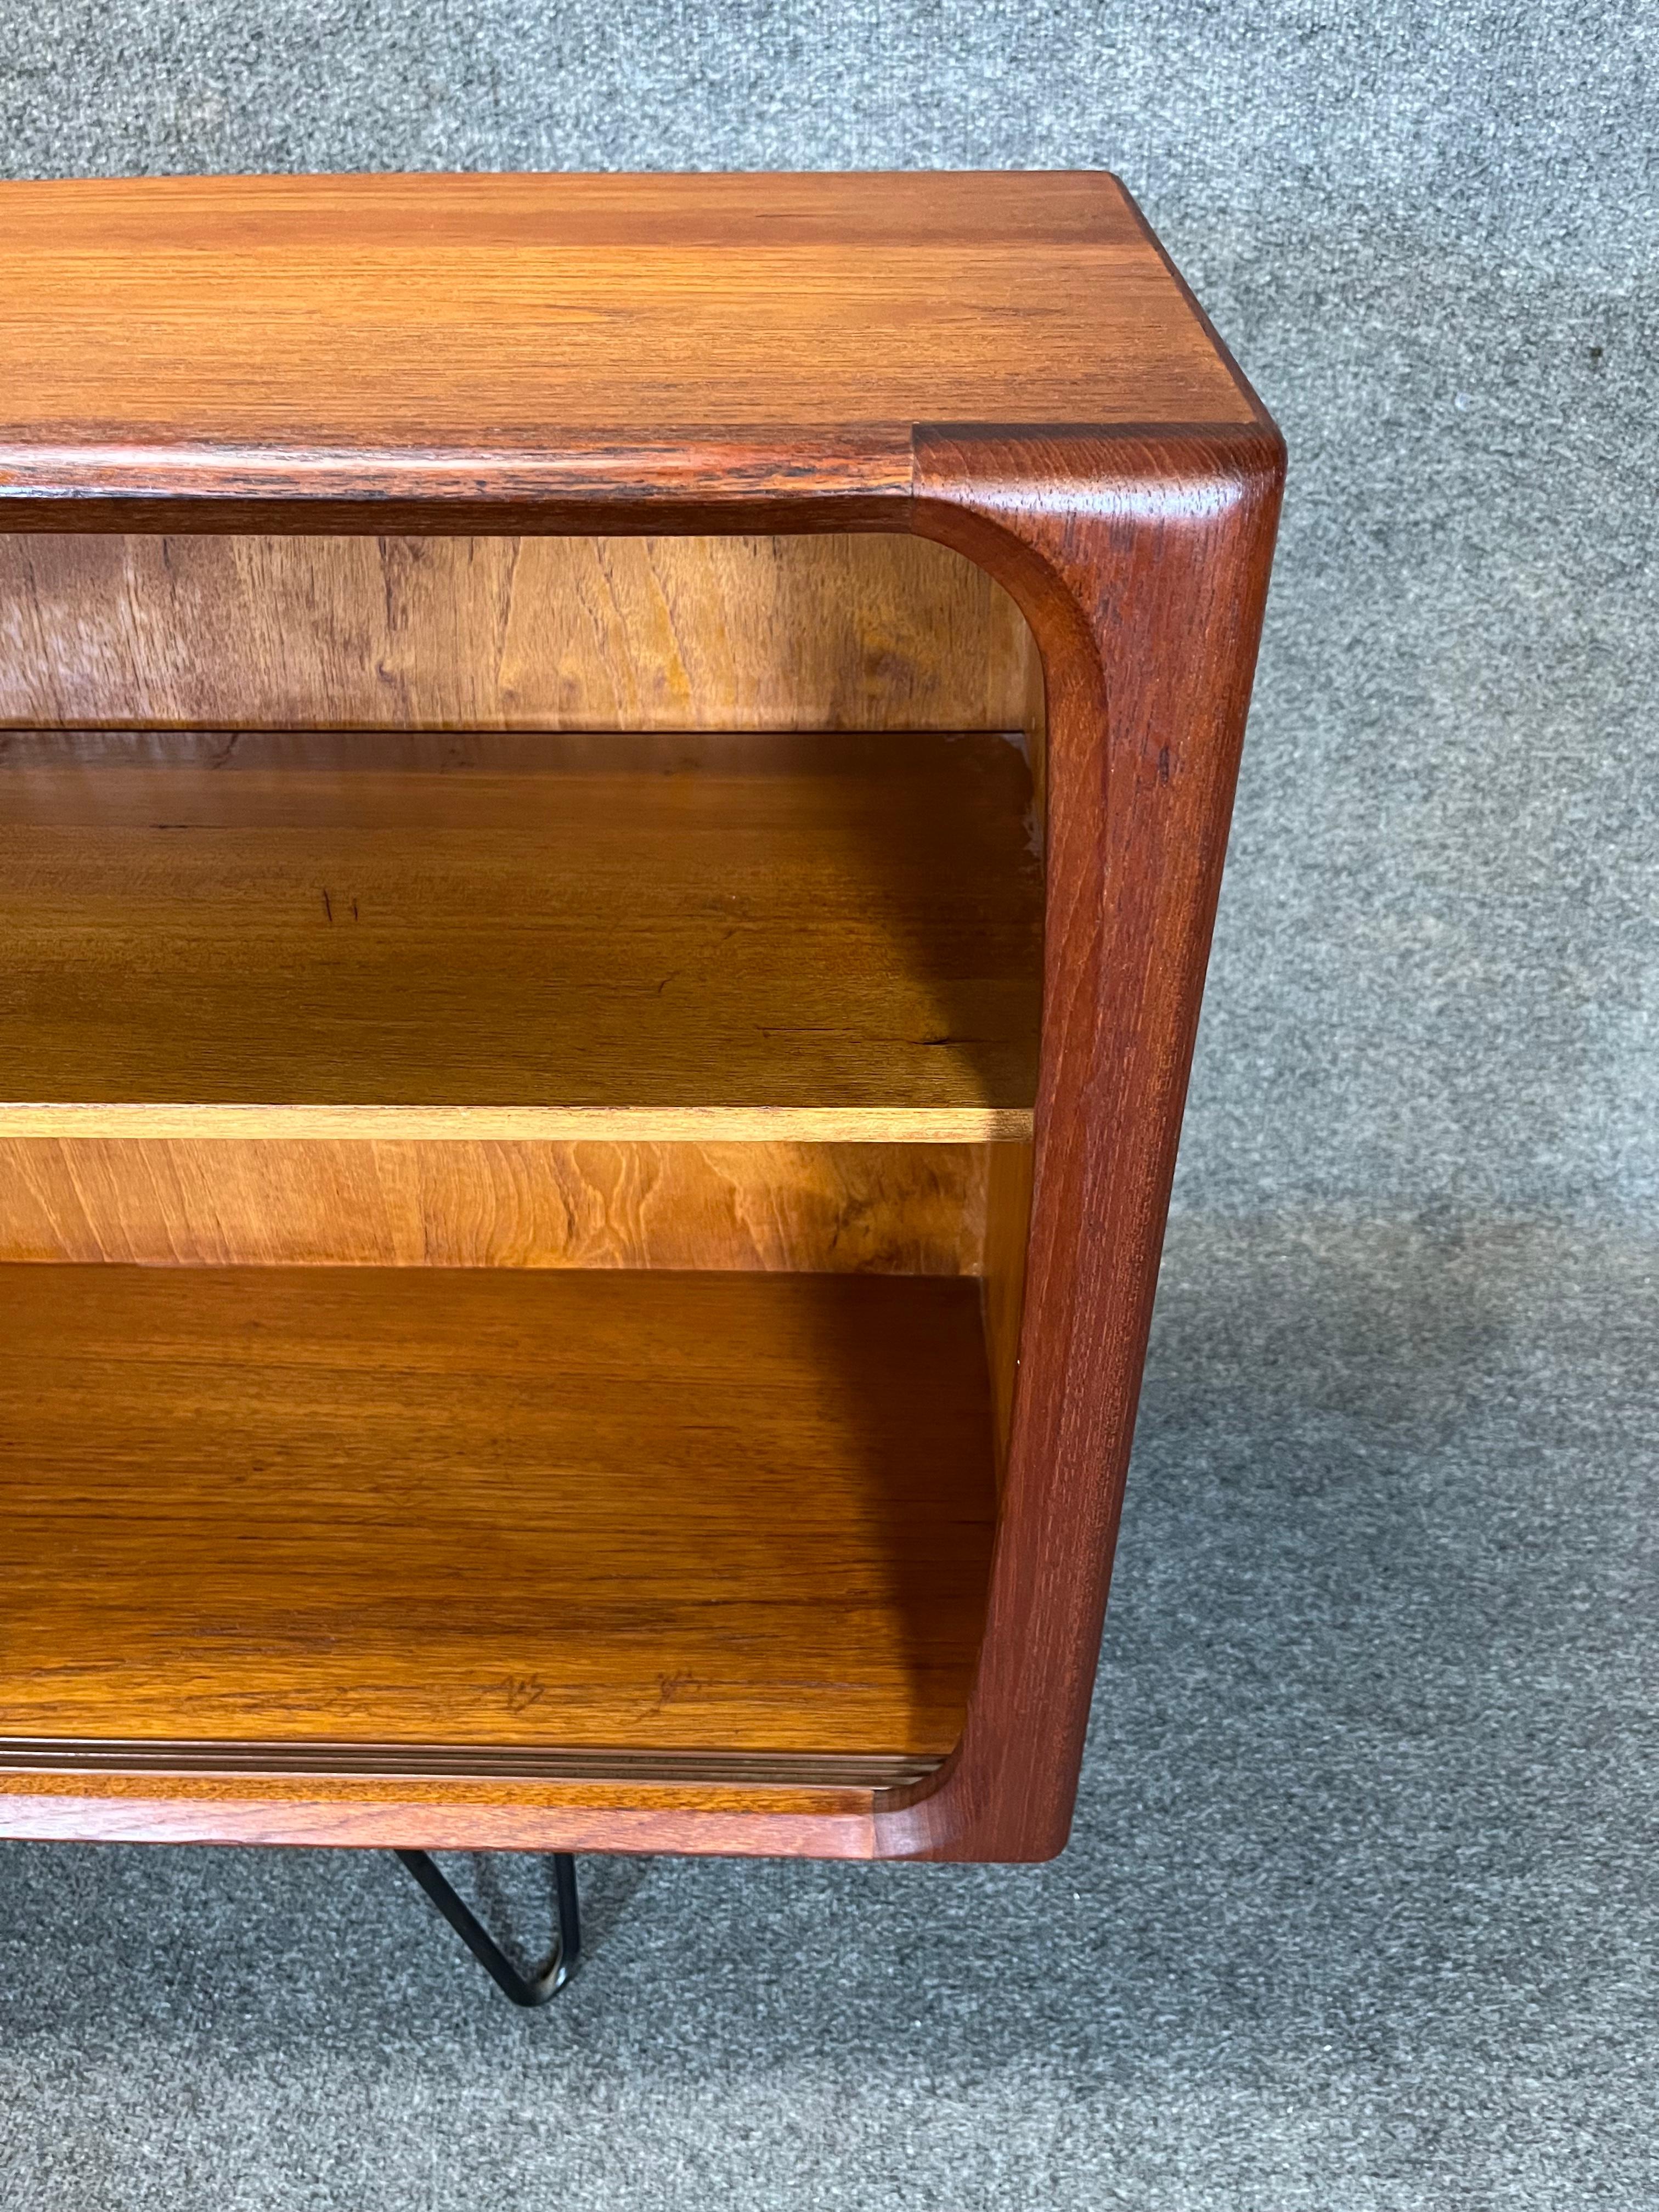 Vintage Mid Century Danish Modern Teak Credenza/Cabinet In Good Condition For Sale In San Marcos, CA